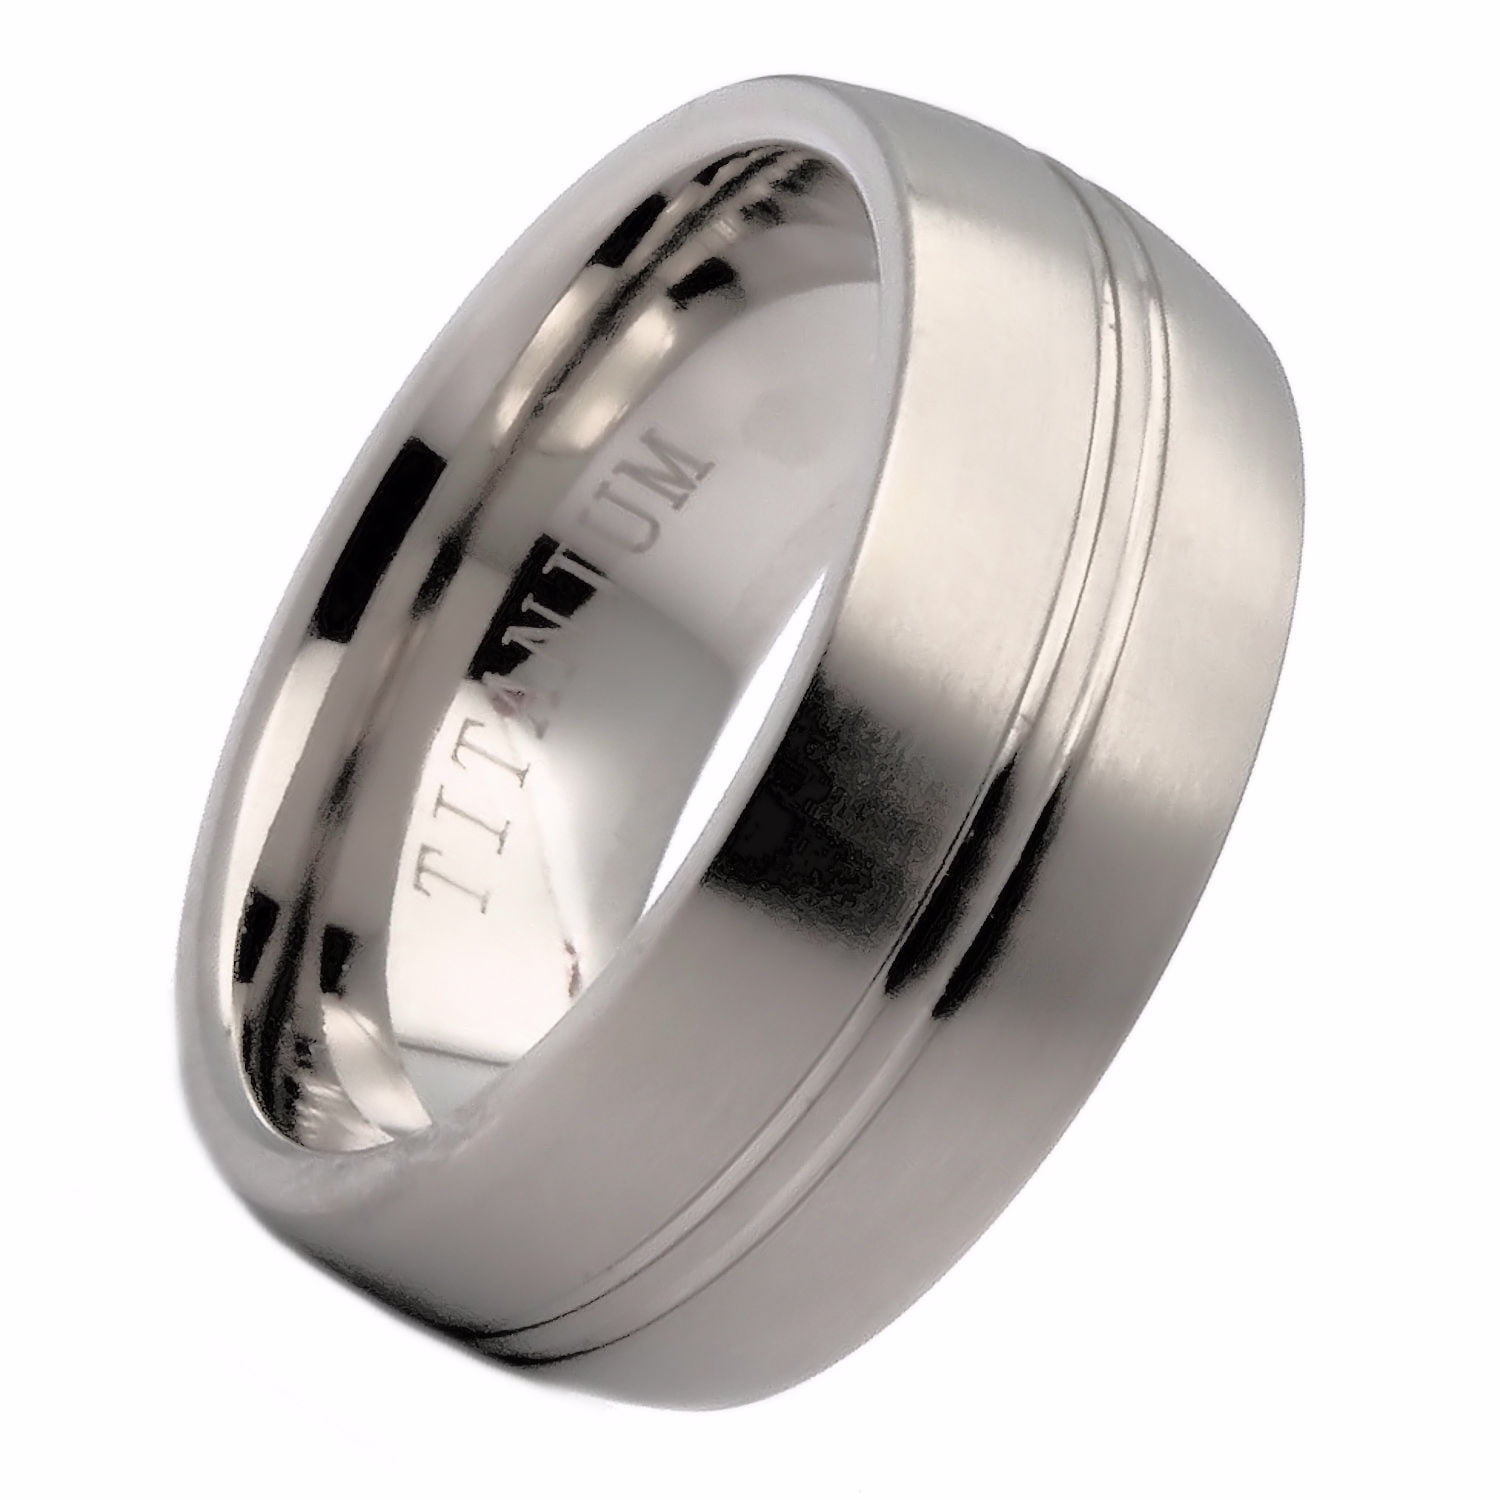 Size 7 Ultra Lightweight Titanium 8mm Double Grooved Wedding Band 